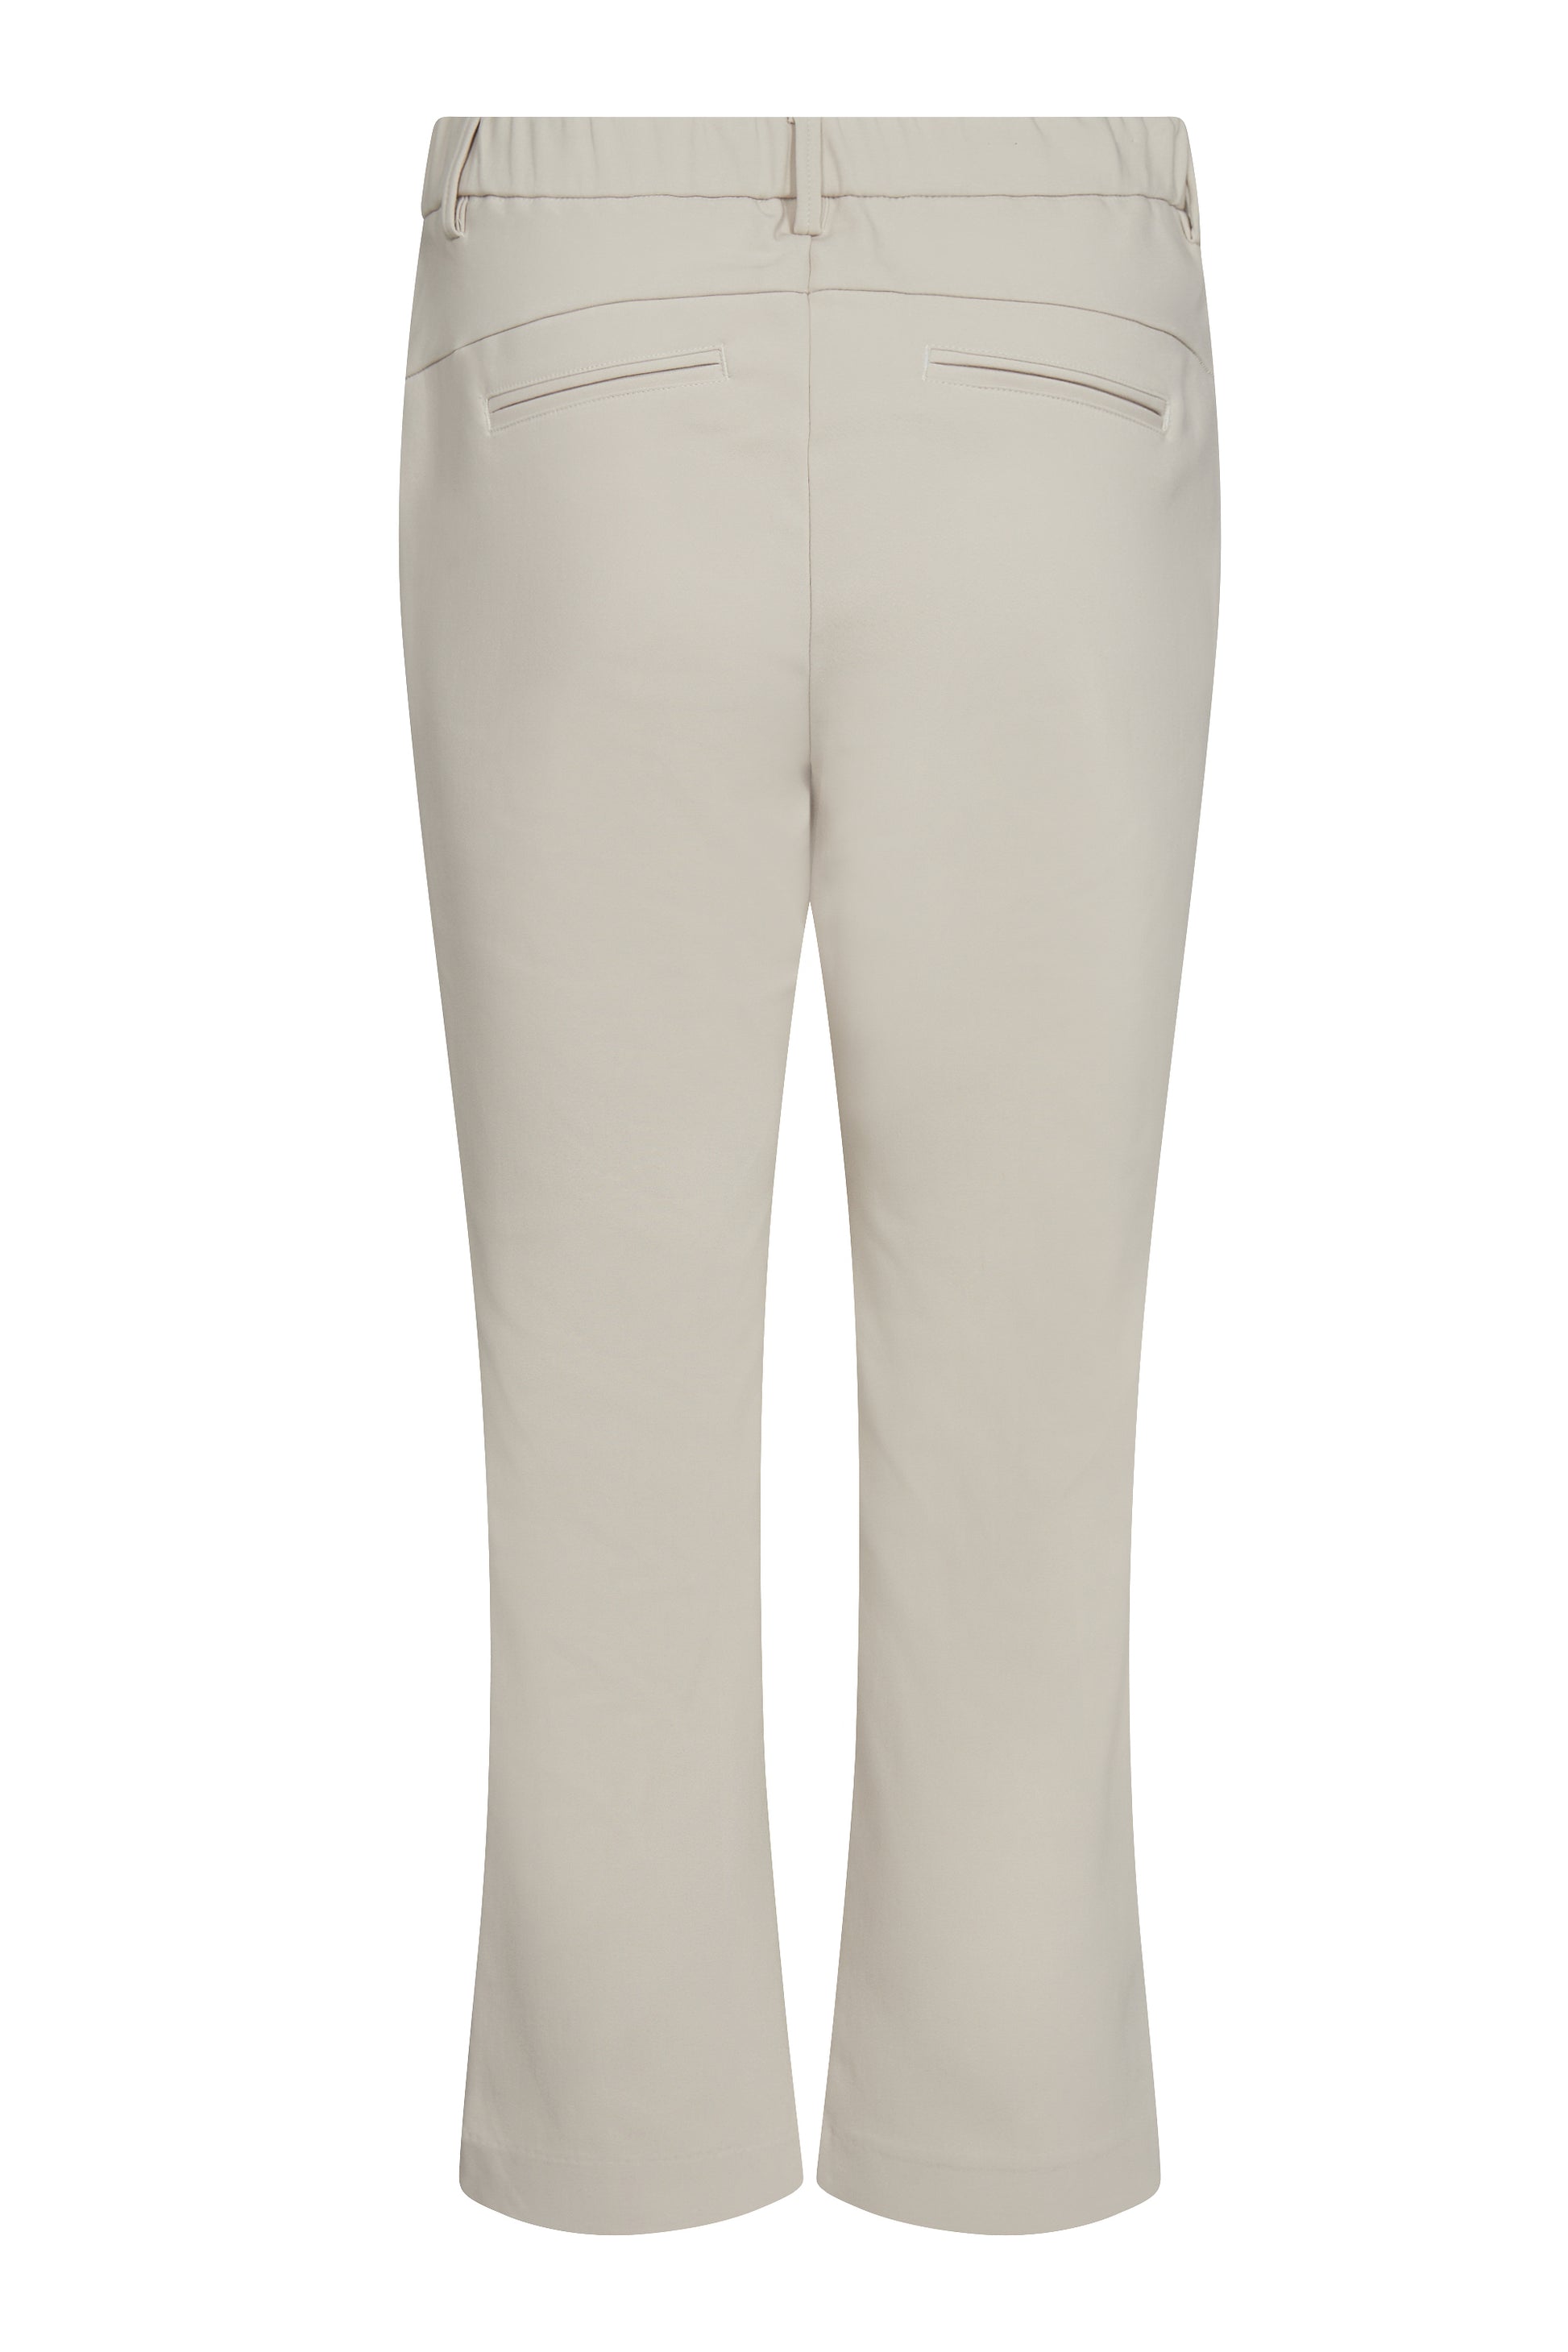 IVY-Alice Cropped Flare Pant - Cream Sand